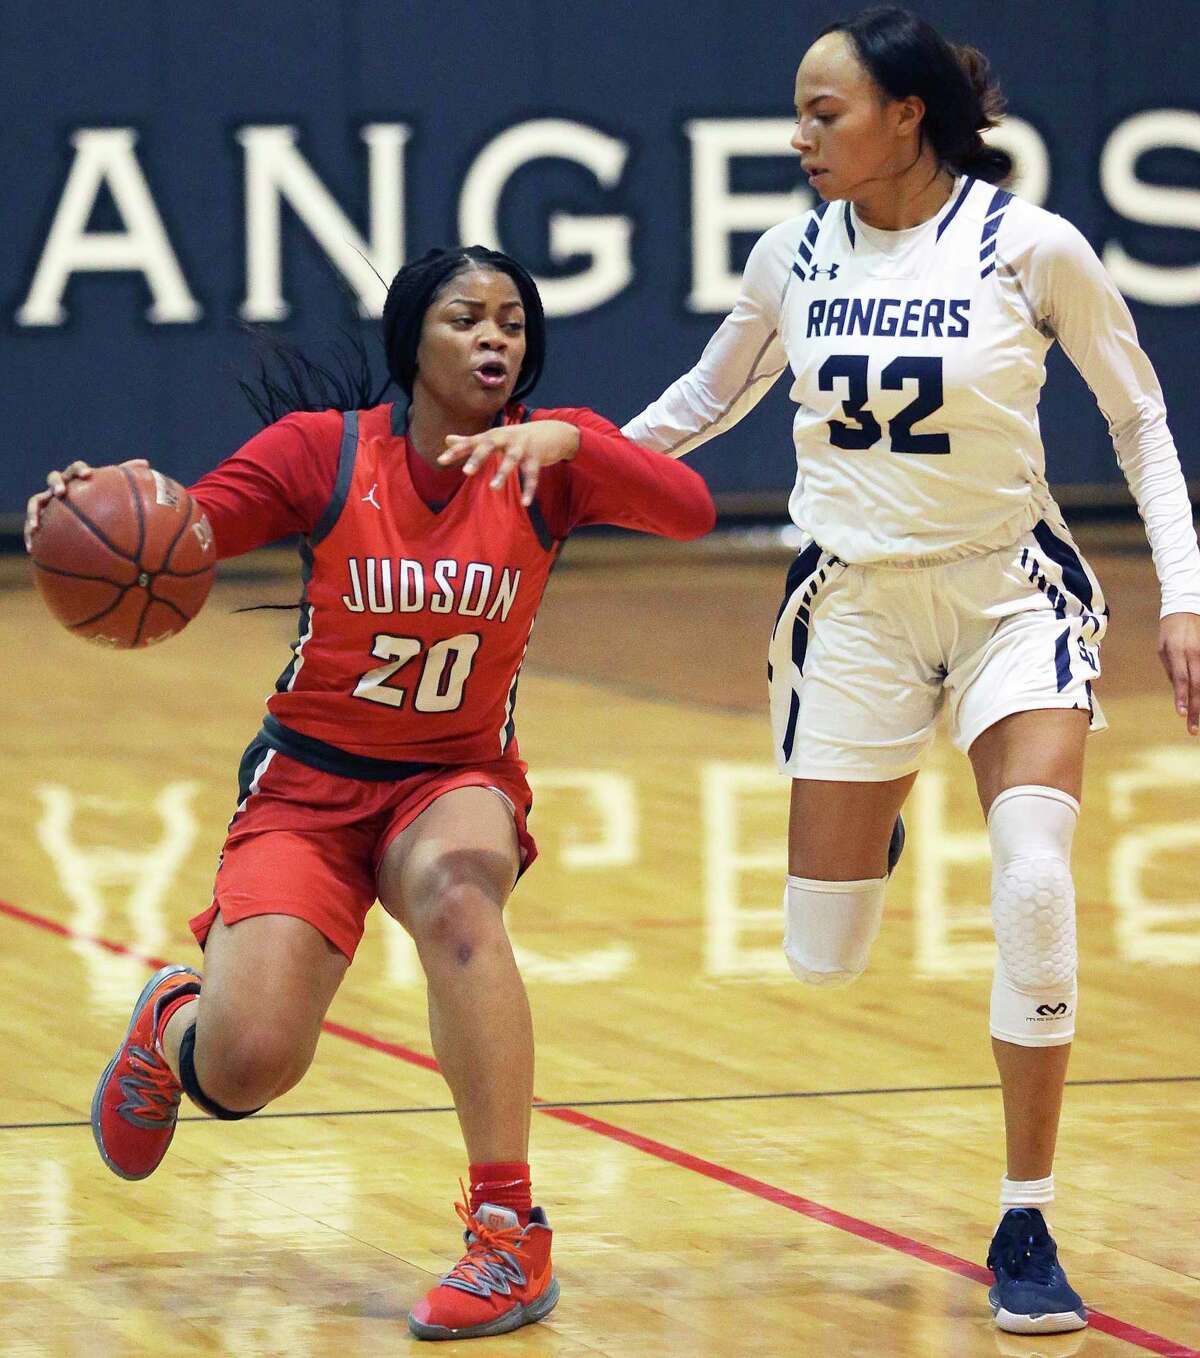 Rocket guard Kierra Sanderlin races into the front court against Brianna Grell as the Smithson Valley girls host the Judson Rockets in girls basketball on Jan. 14, 2020.